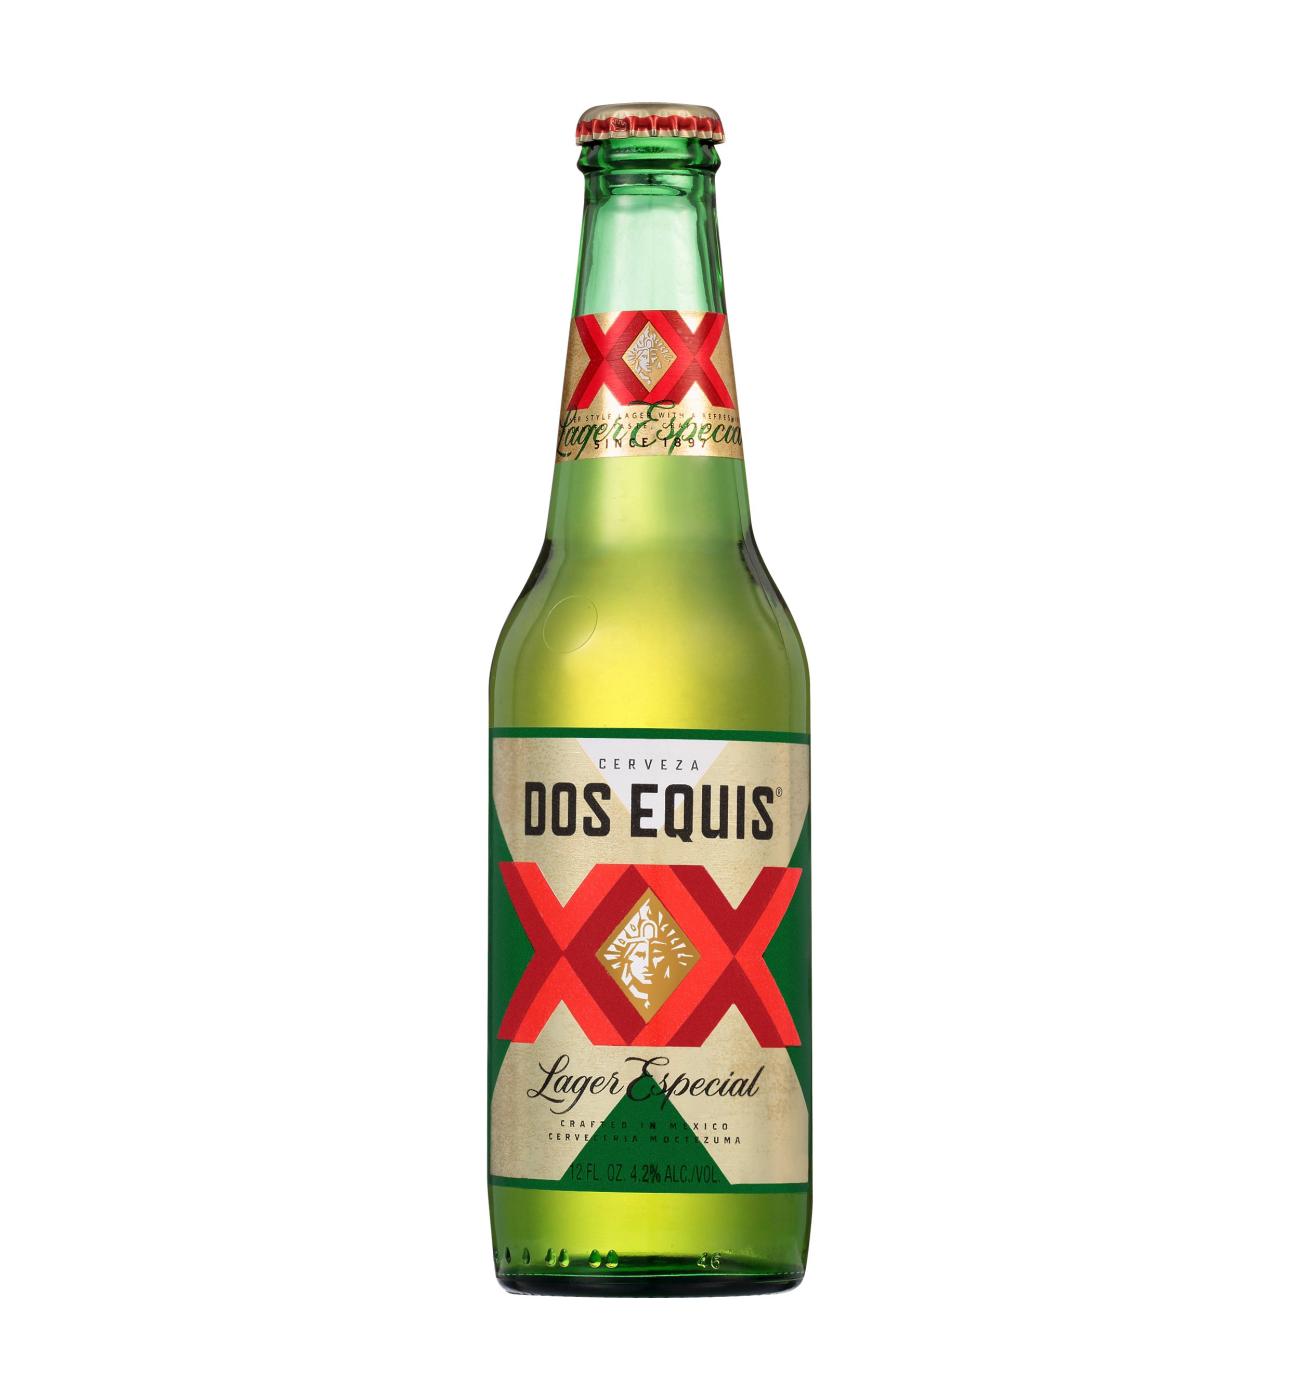 Dos Equis Lager Especial Beer 12 oz Bottles; image 3 of 3